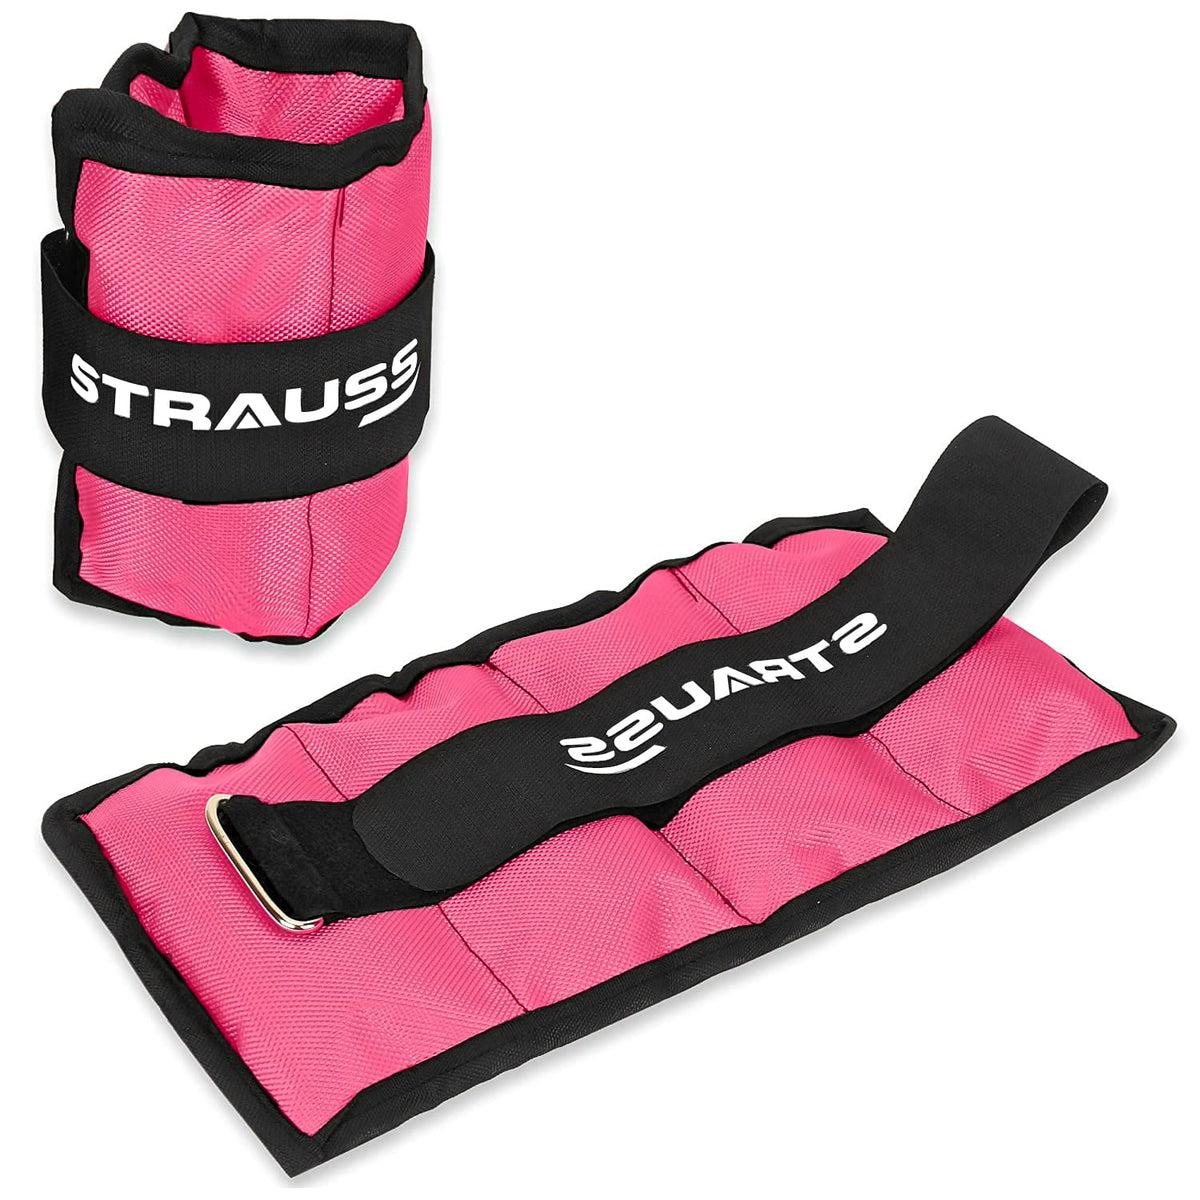 Strauss Adjustable Ankle/Wrist Weights 0.5 KG X 2 | Ideal for Walking, Running, Jogging, Cycling, Gym, Workout & Strength Training | Easy to Use on Ankle, Wrist, Leg, (Pink)